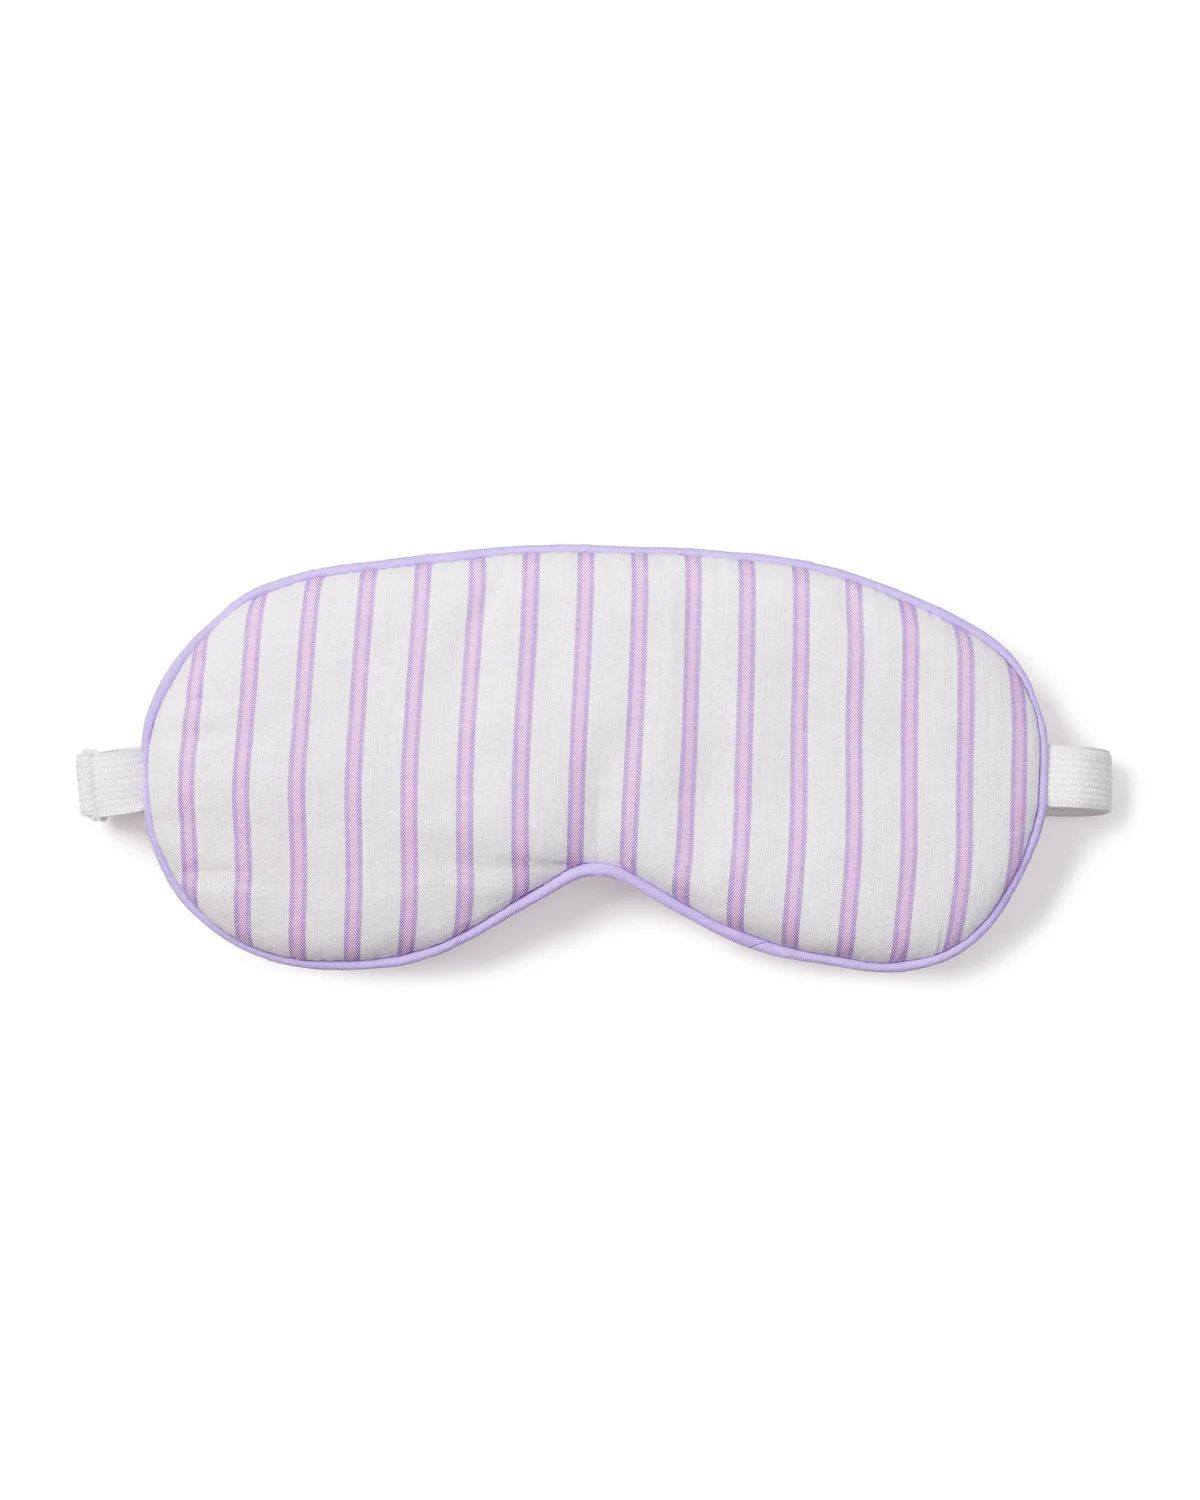 Adult Lavender French Ticking Traditional Sleep Mask | Over The Moon